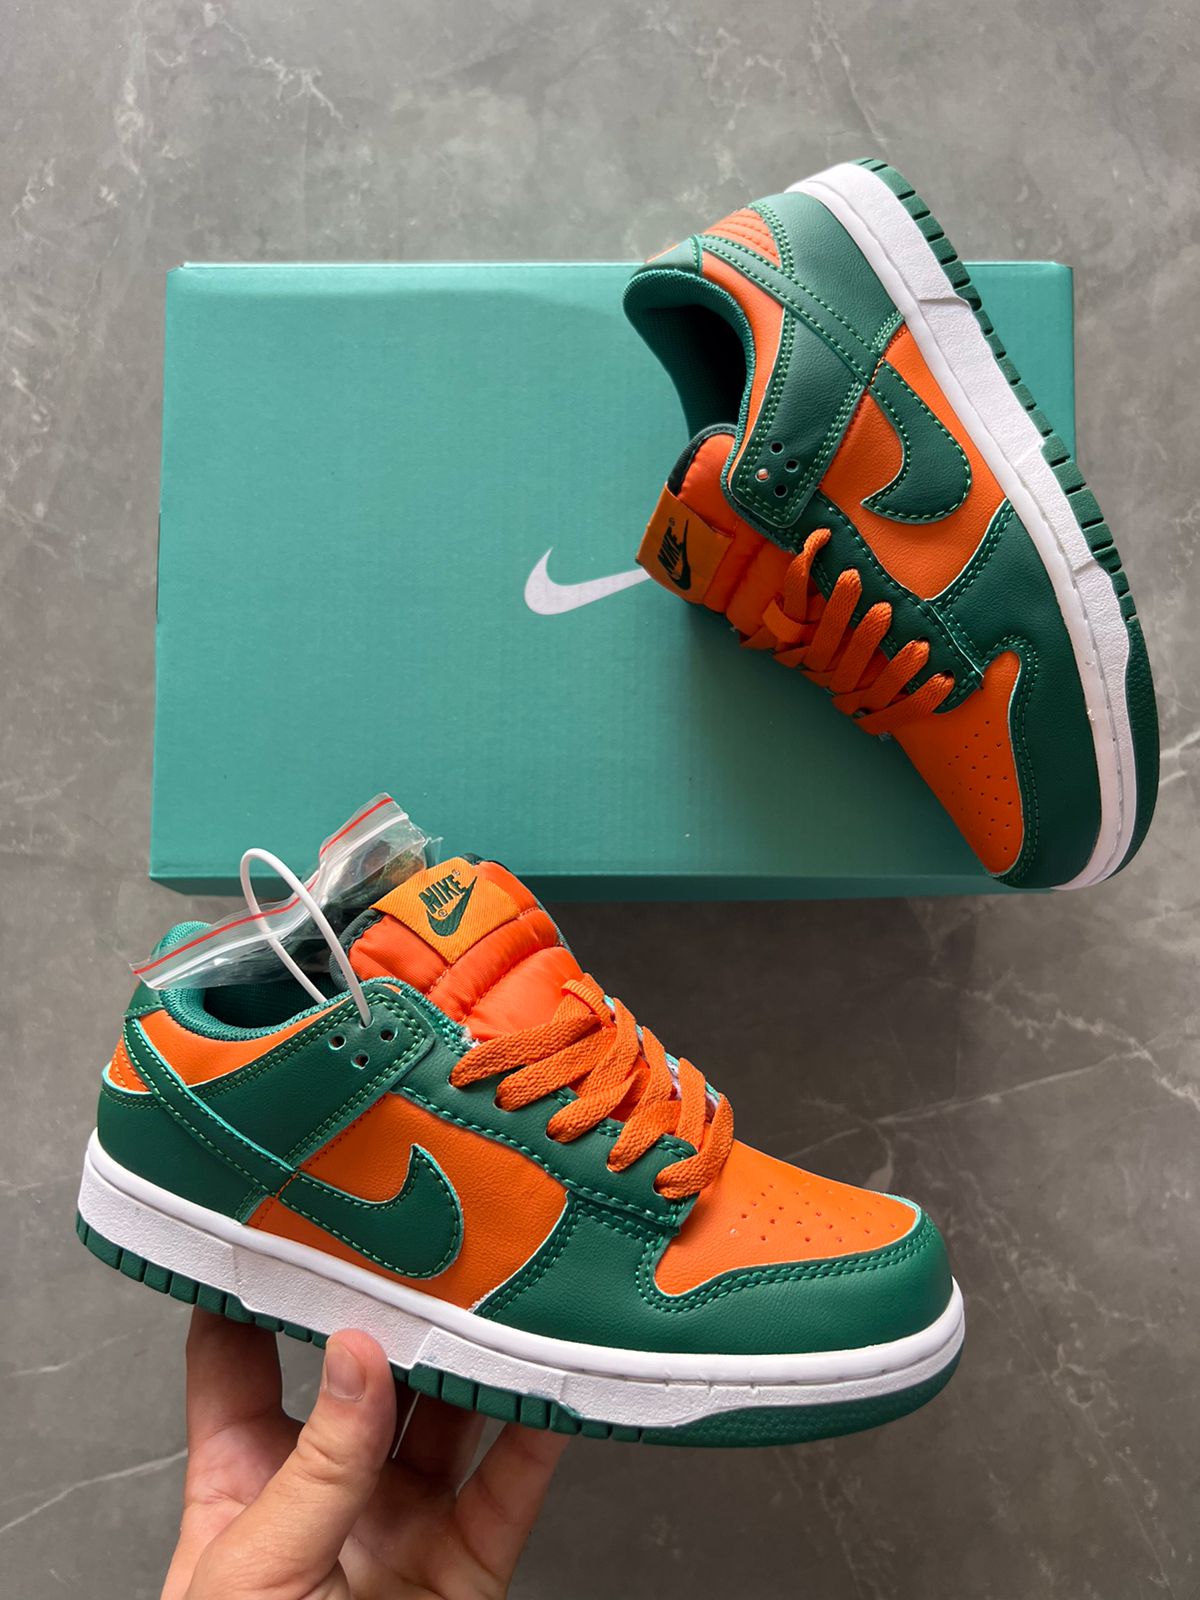 SB Dunk Miami Sneakers For Girls